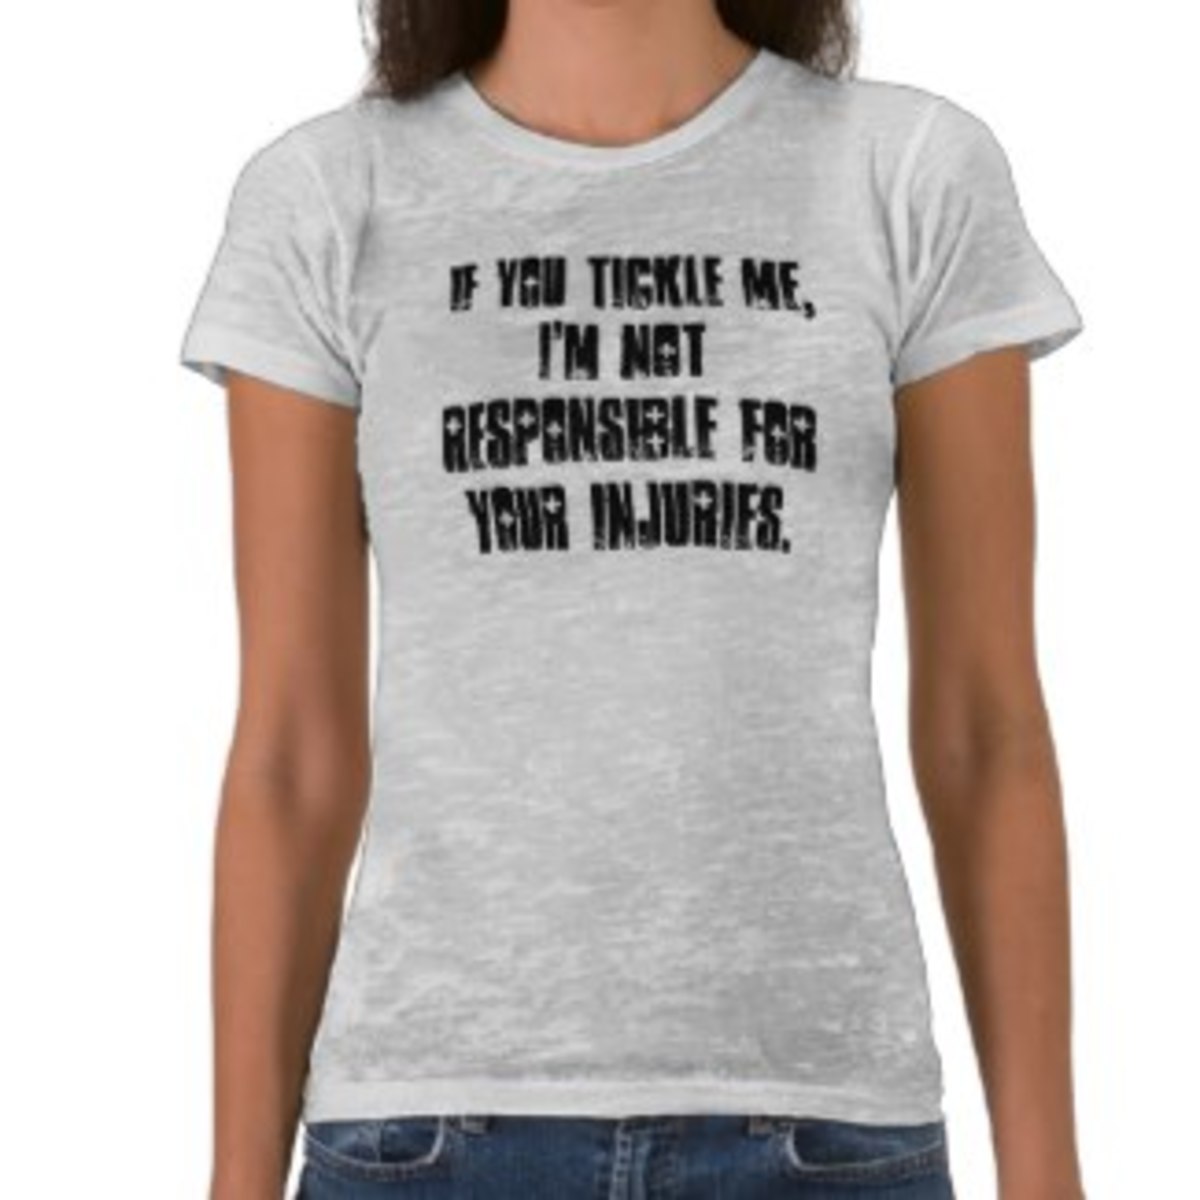 If you tickle me t-shirt by buluga